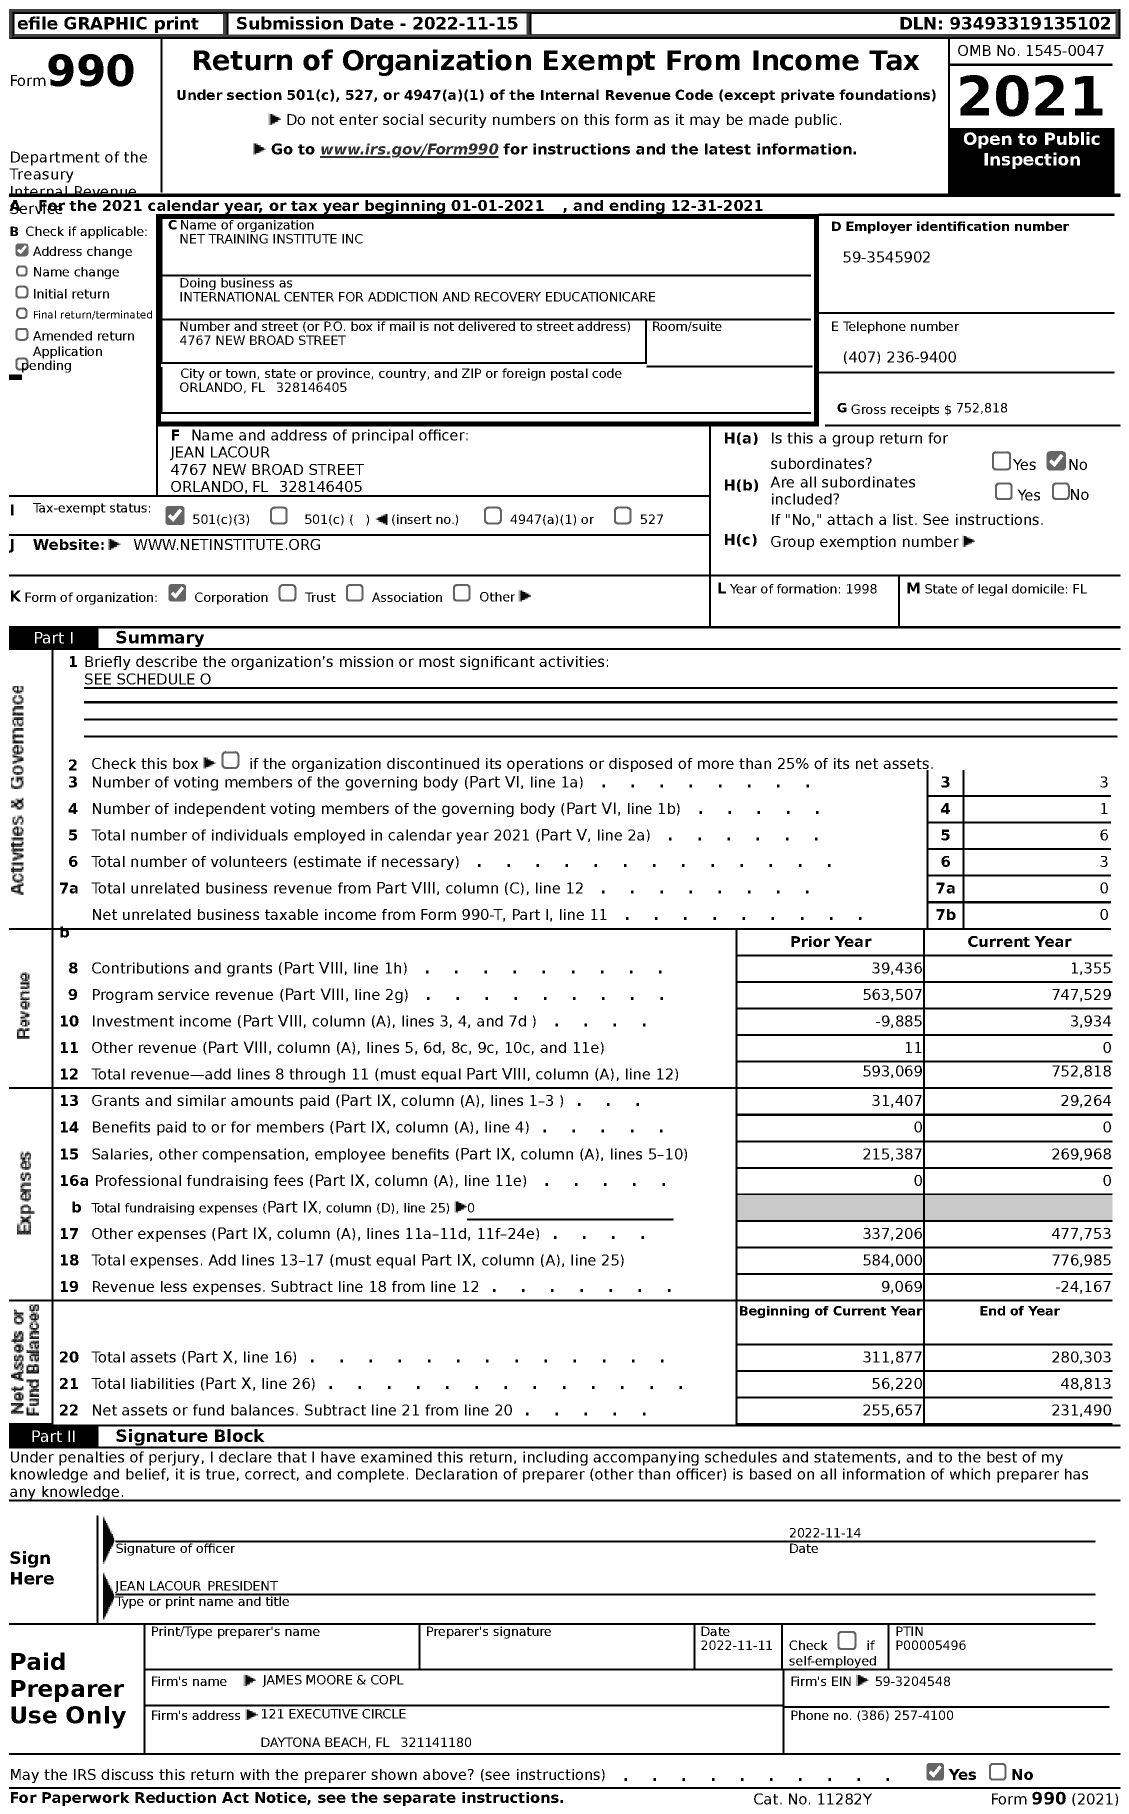 Image of first page of 2021 Form 990 for International Center for Addiction and Recovery Education